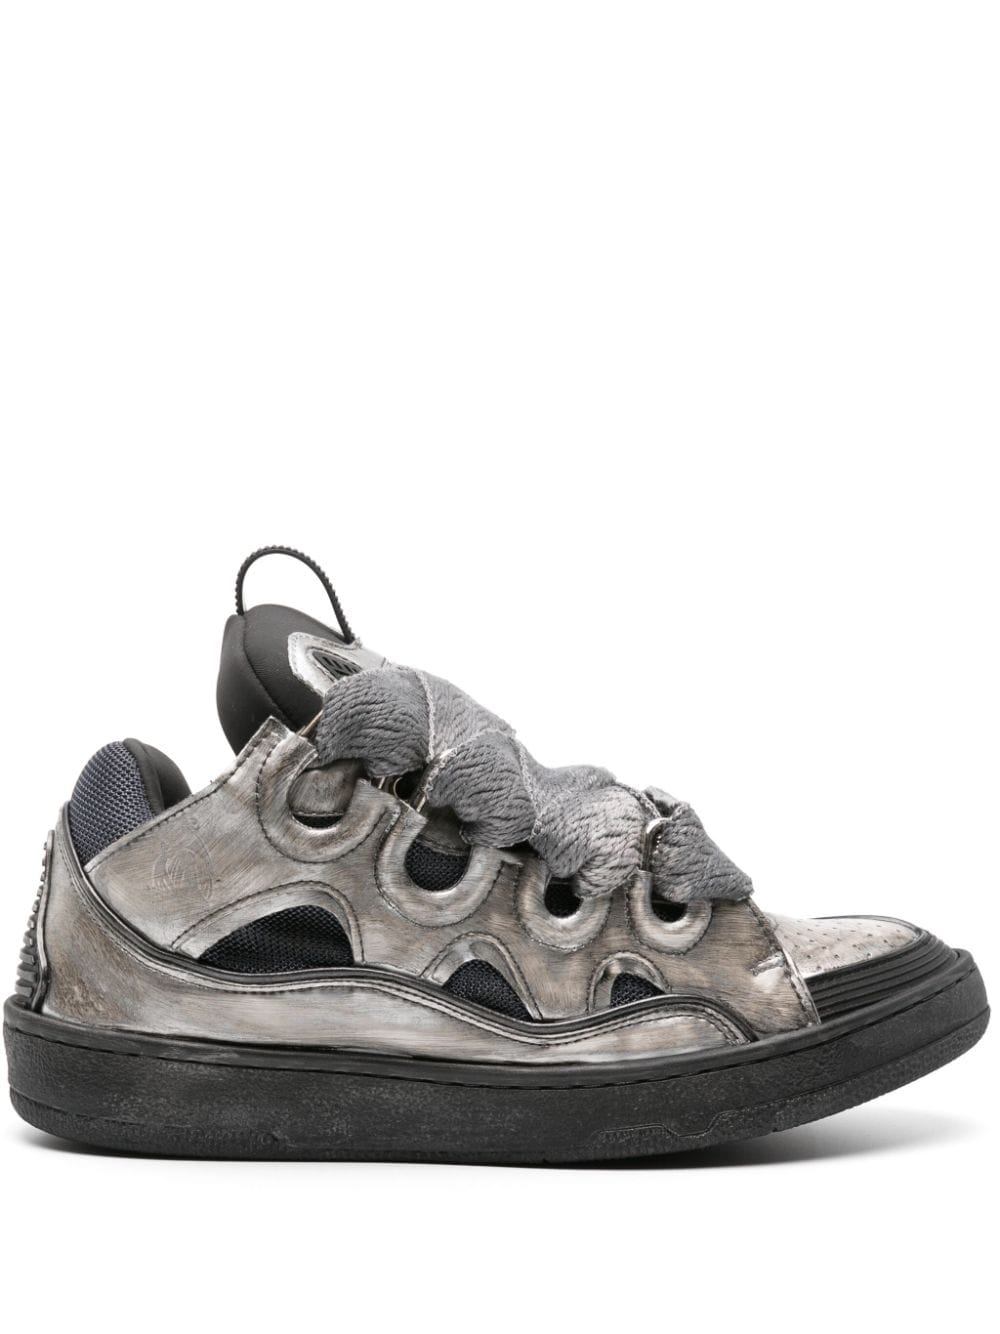 Lanvin Curb chunky leather sneakers Silver